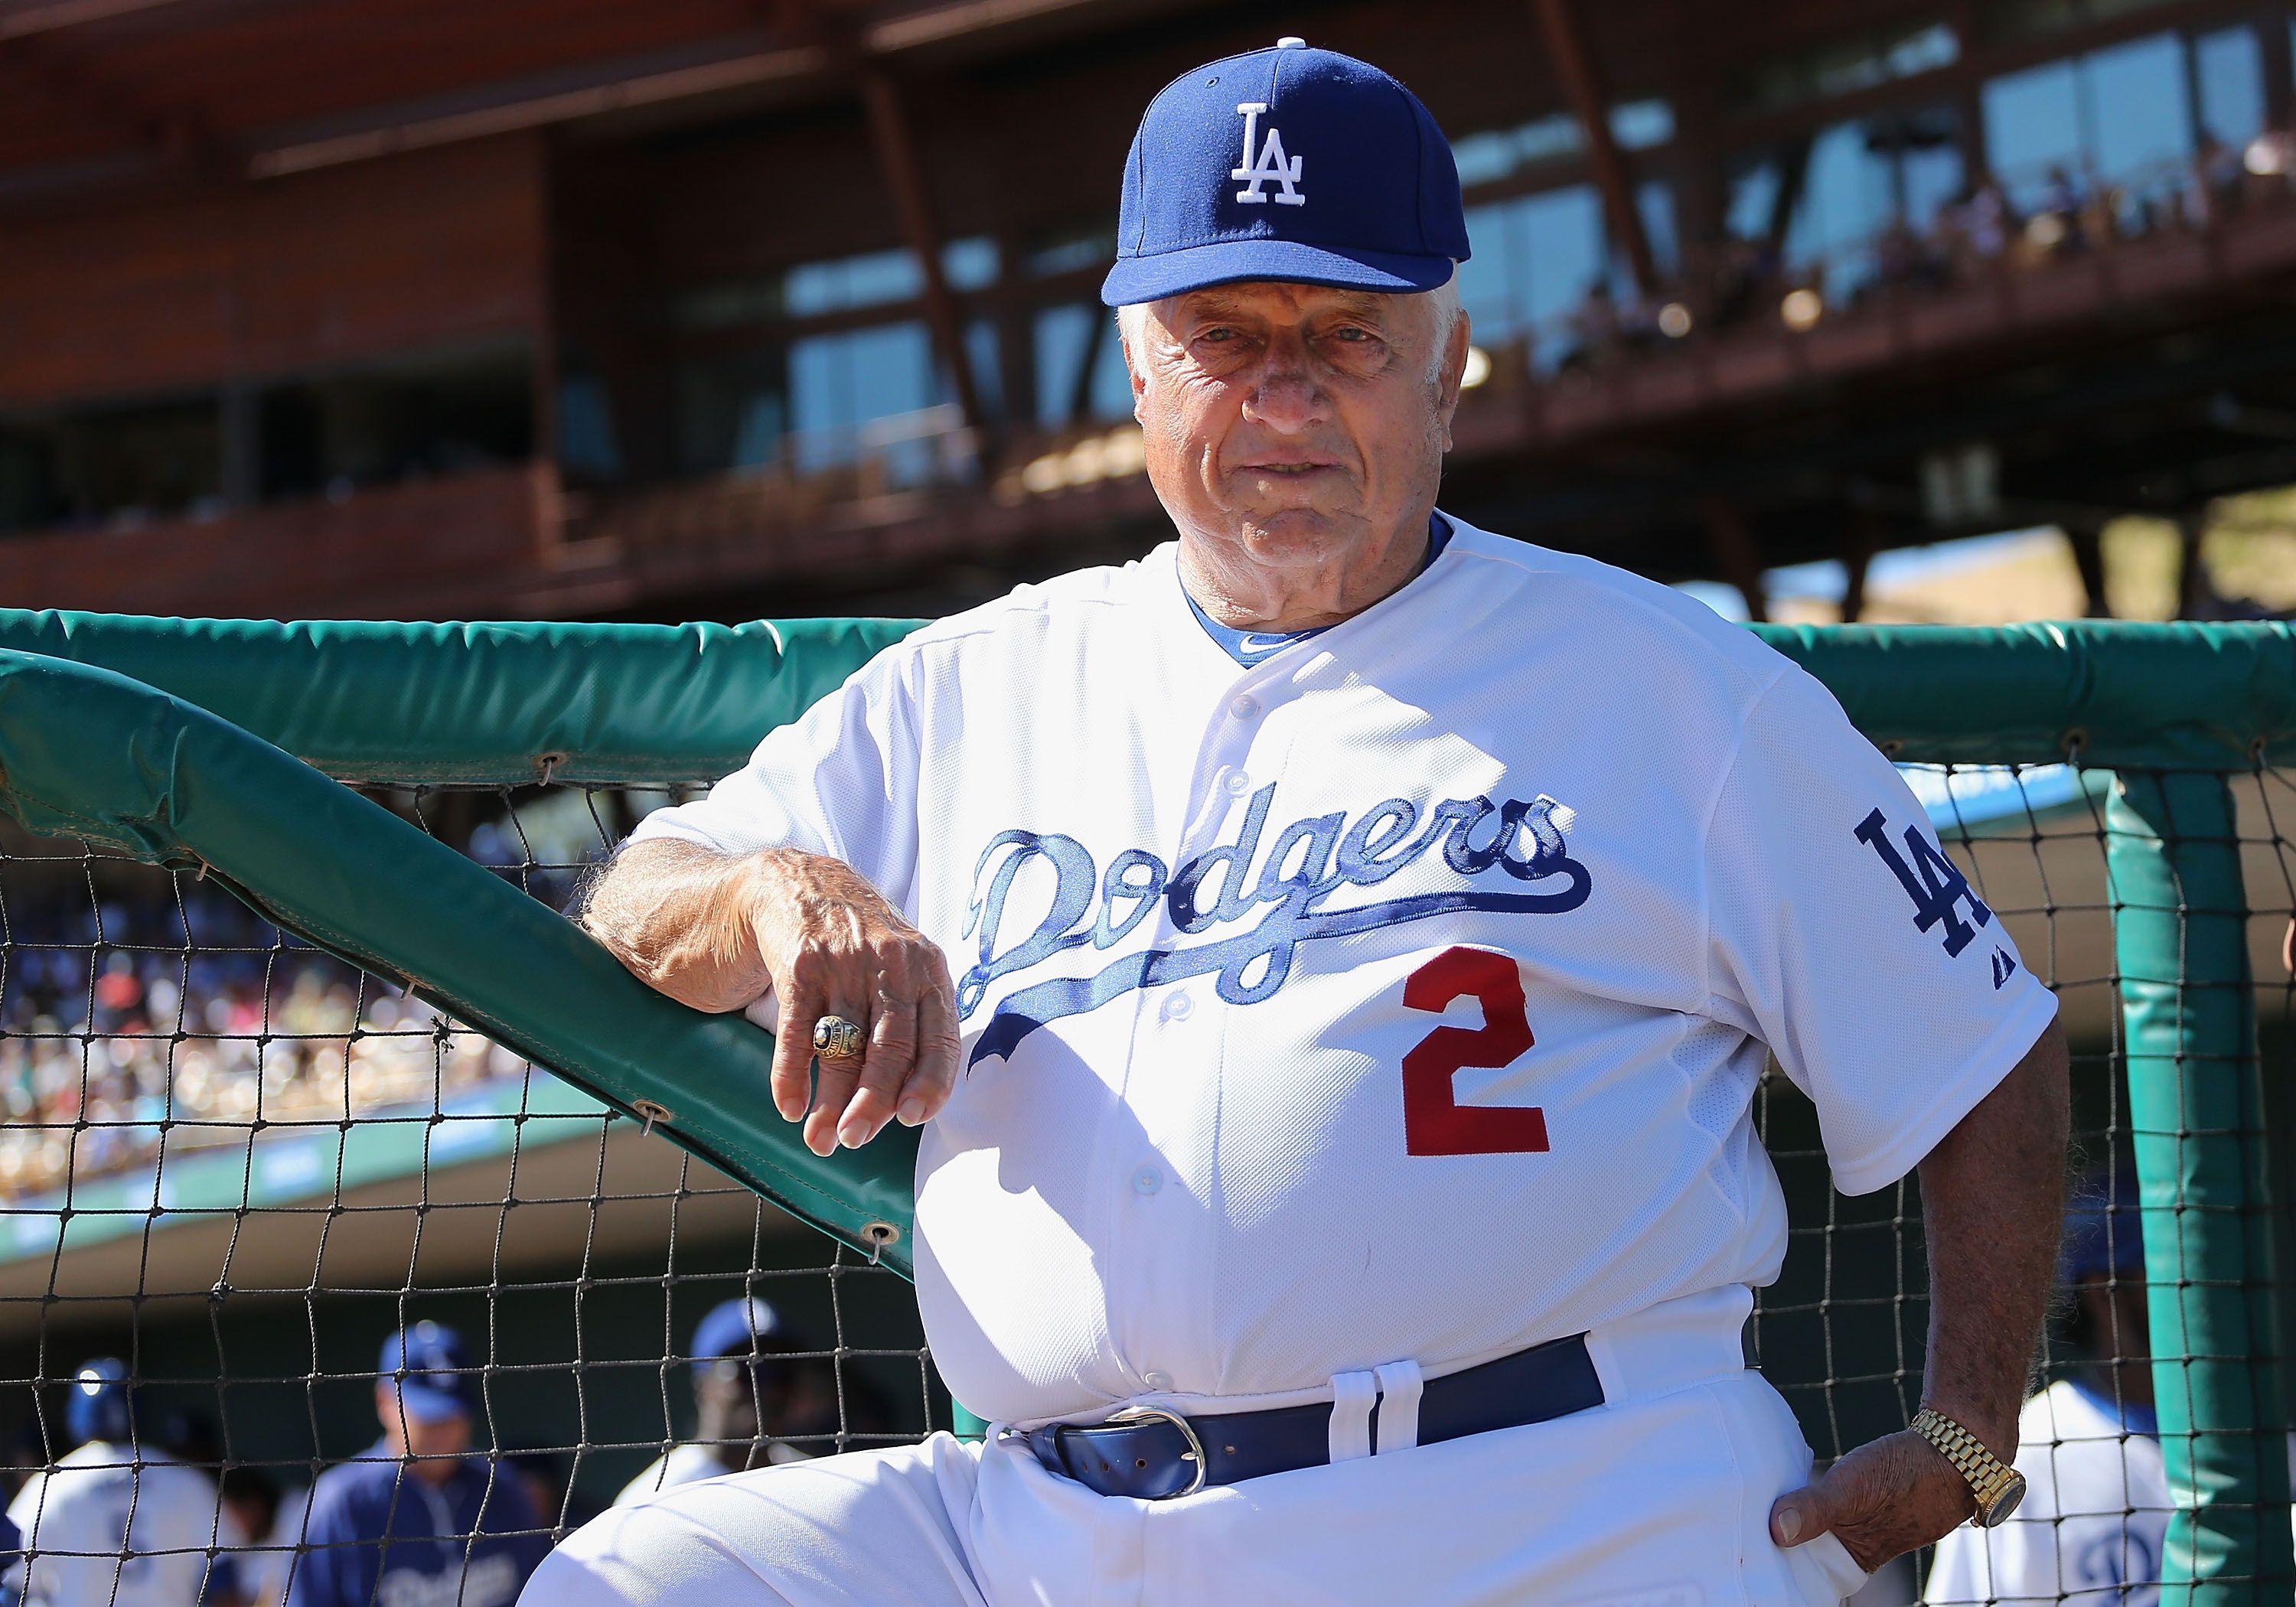 Tommy Lasorda during the spring training game against the Oakland Athletics on March 10, 2014, in Glendale, Arizona | Photo: Christian Petersen/Getty Images